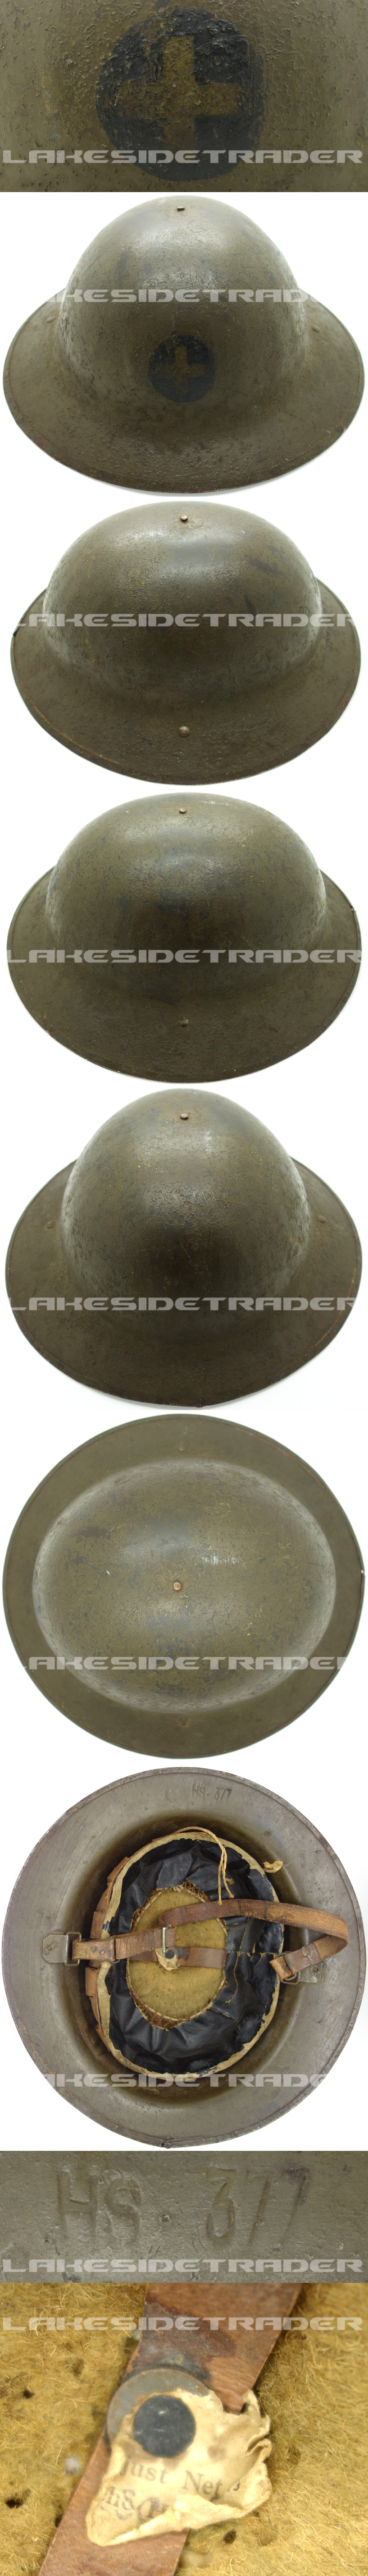 US, WWI - M1917 33rd Infantry Division Doughboy Helmet